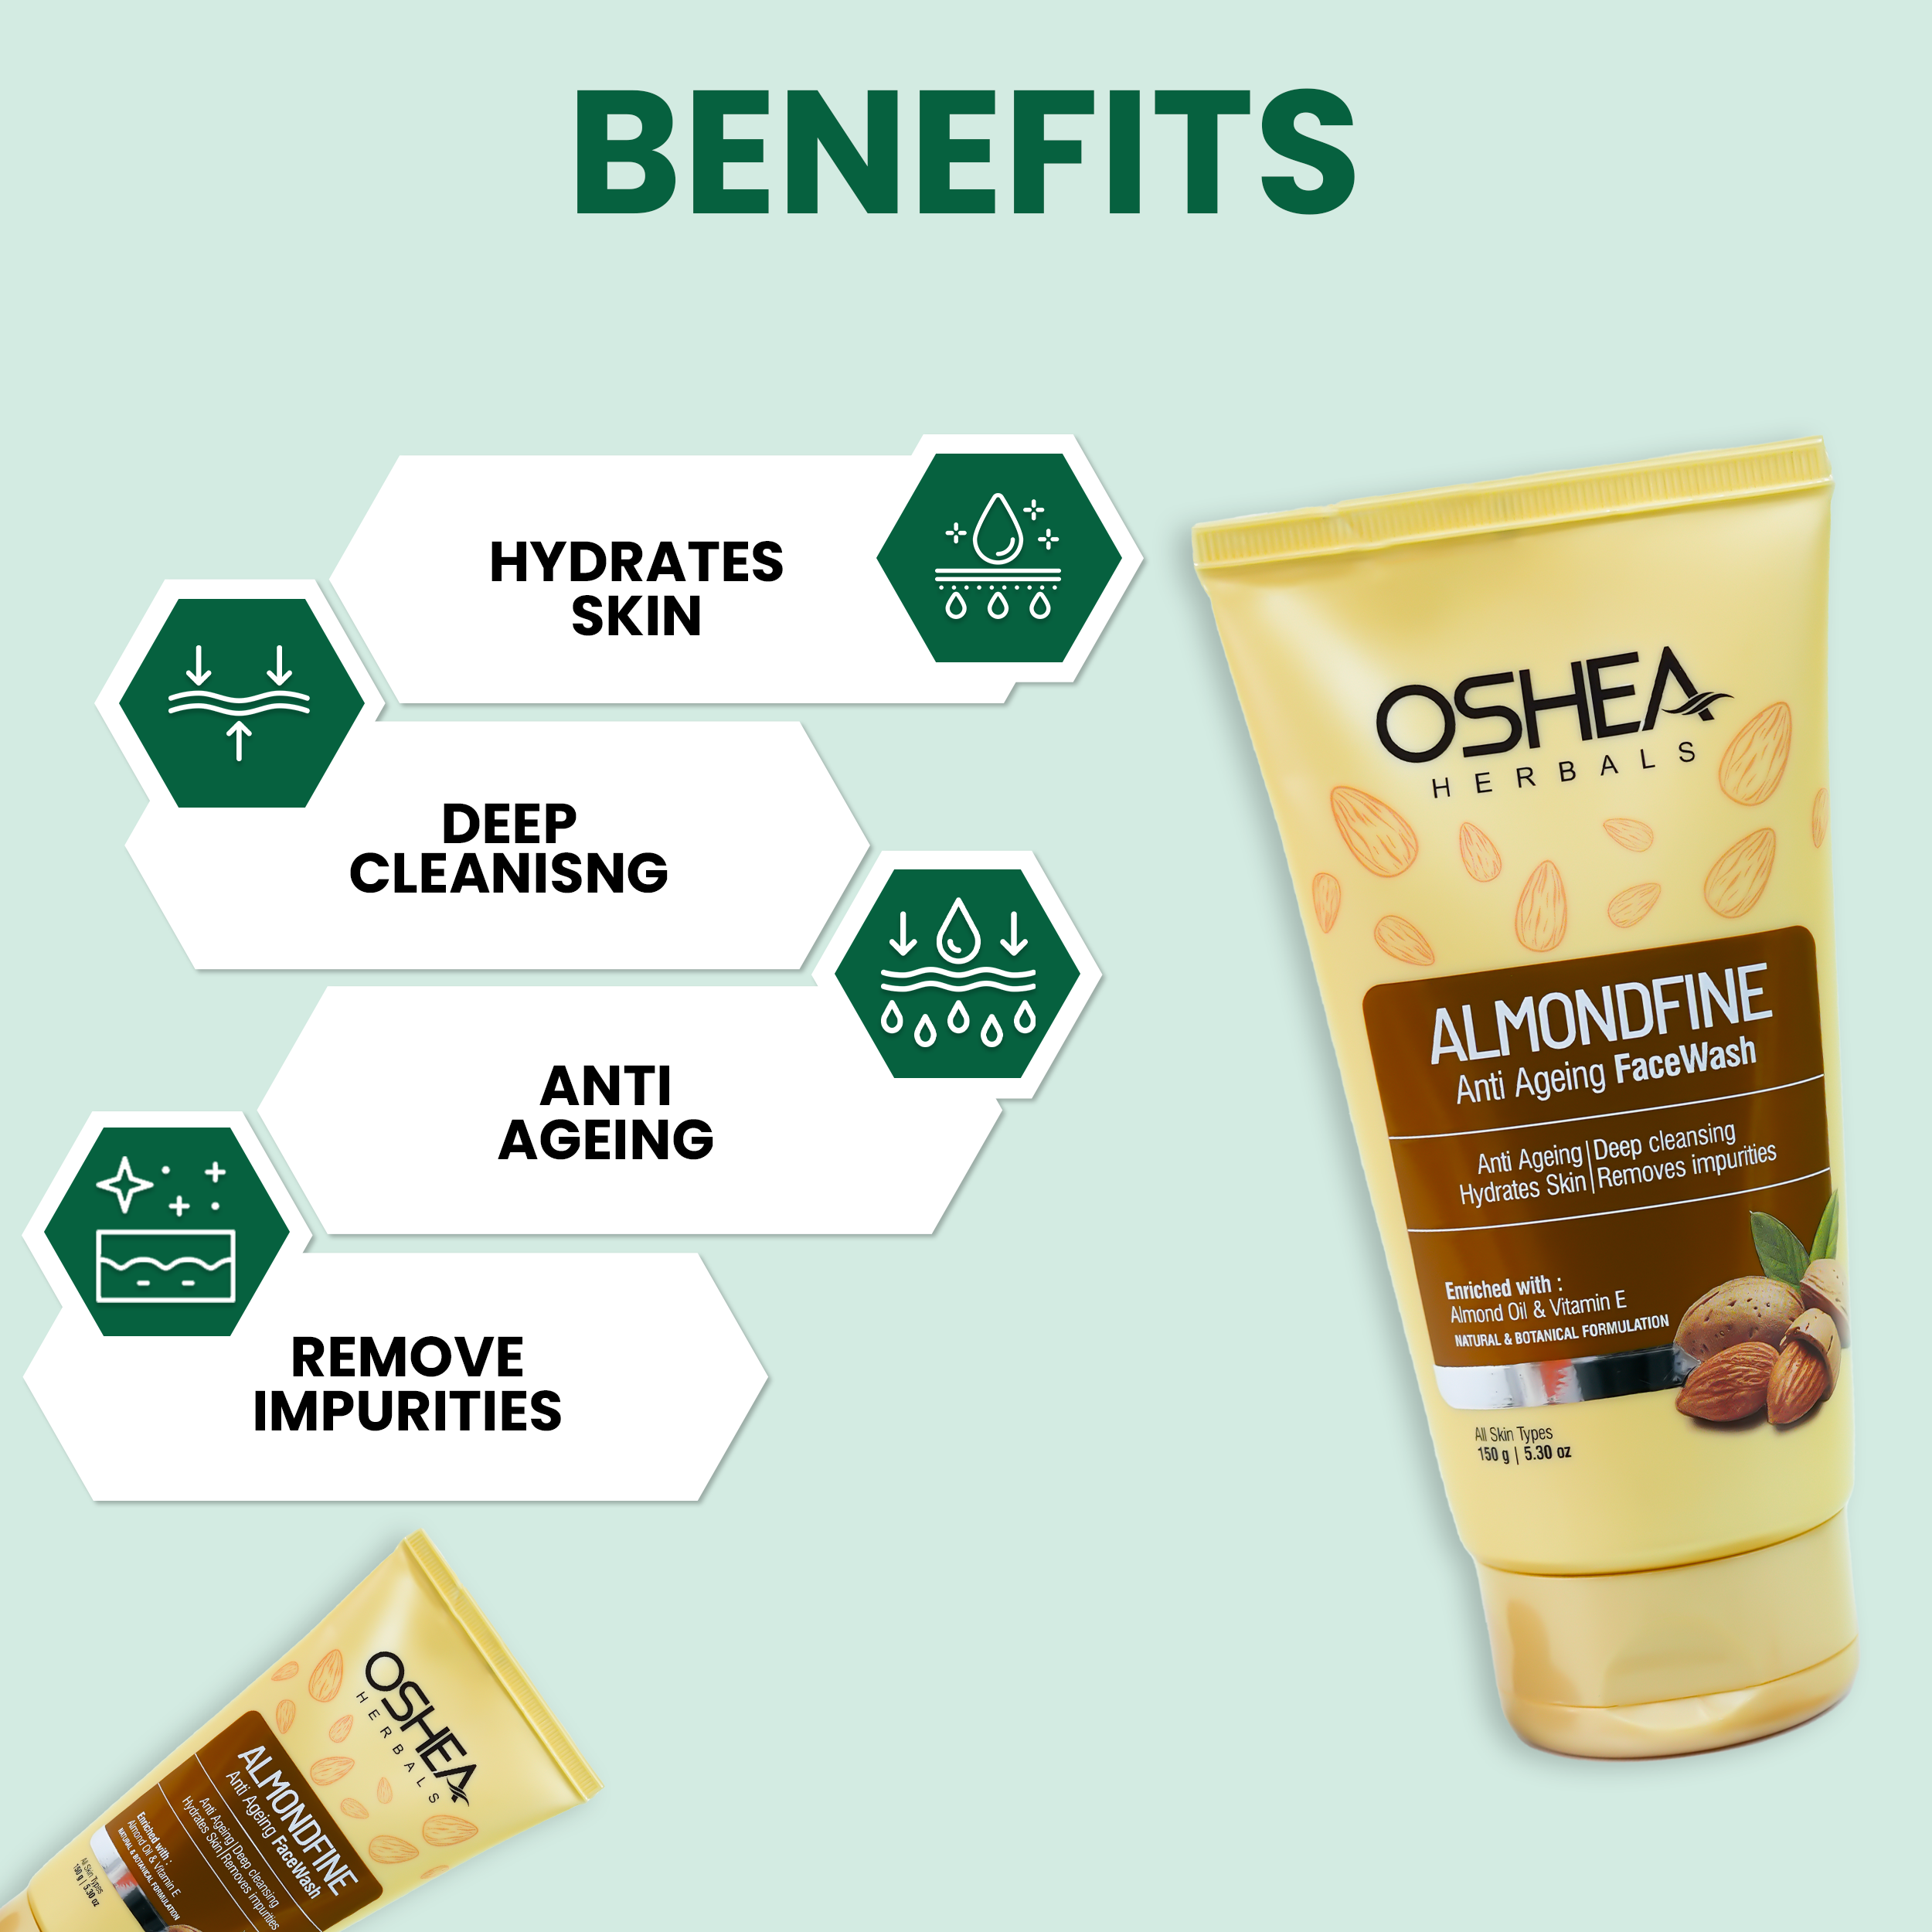 Benefits Almondfine Anti Ageing Face wash Oshea Herbals